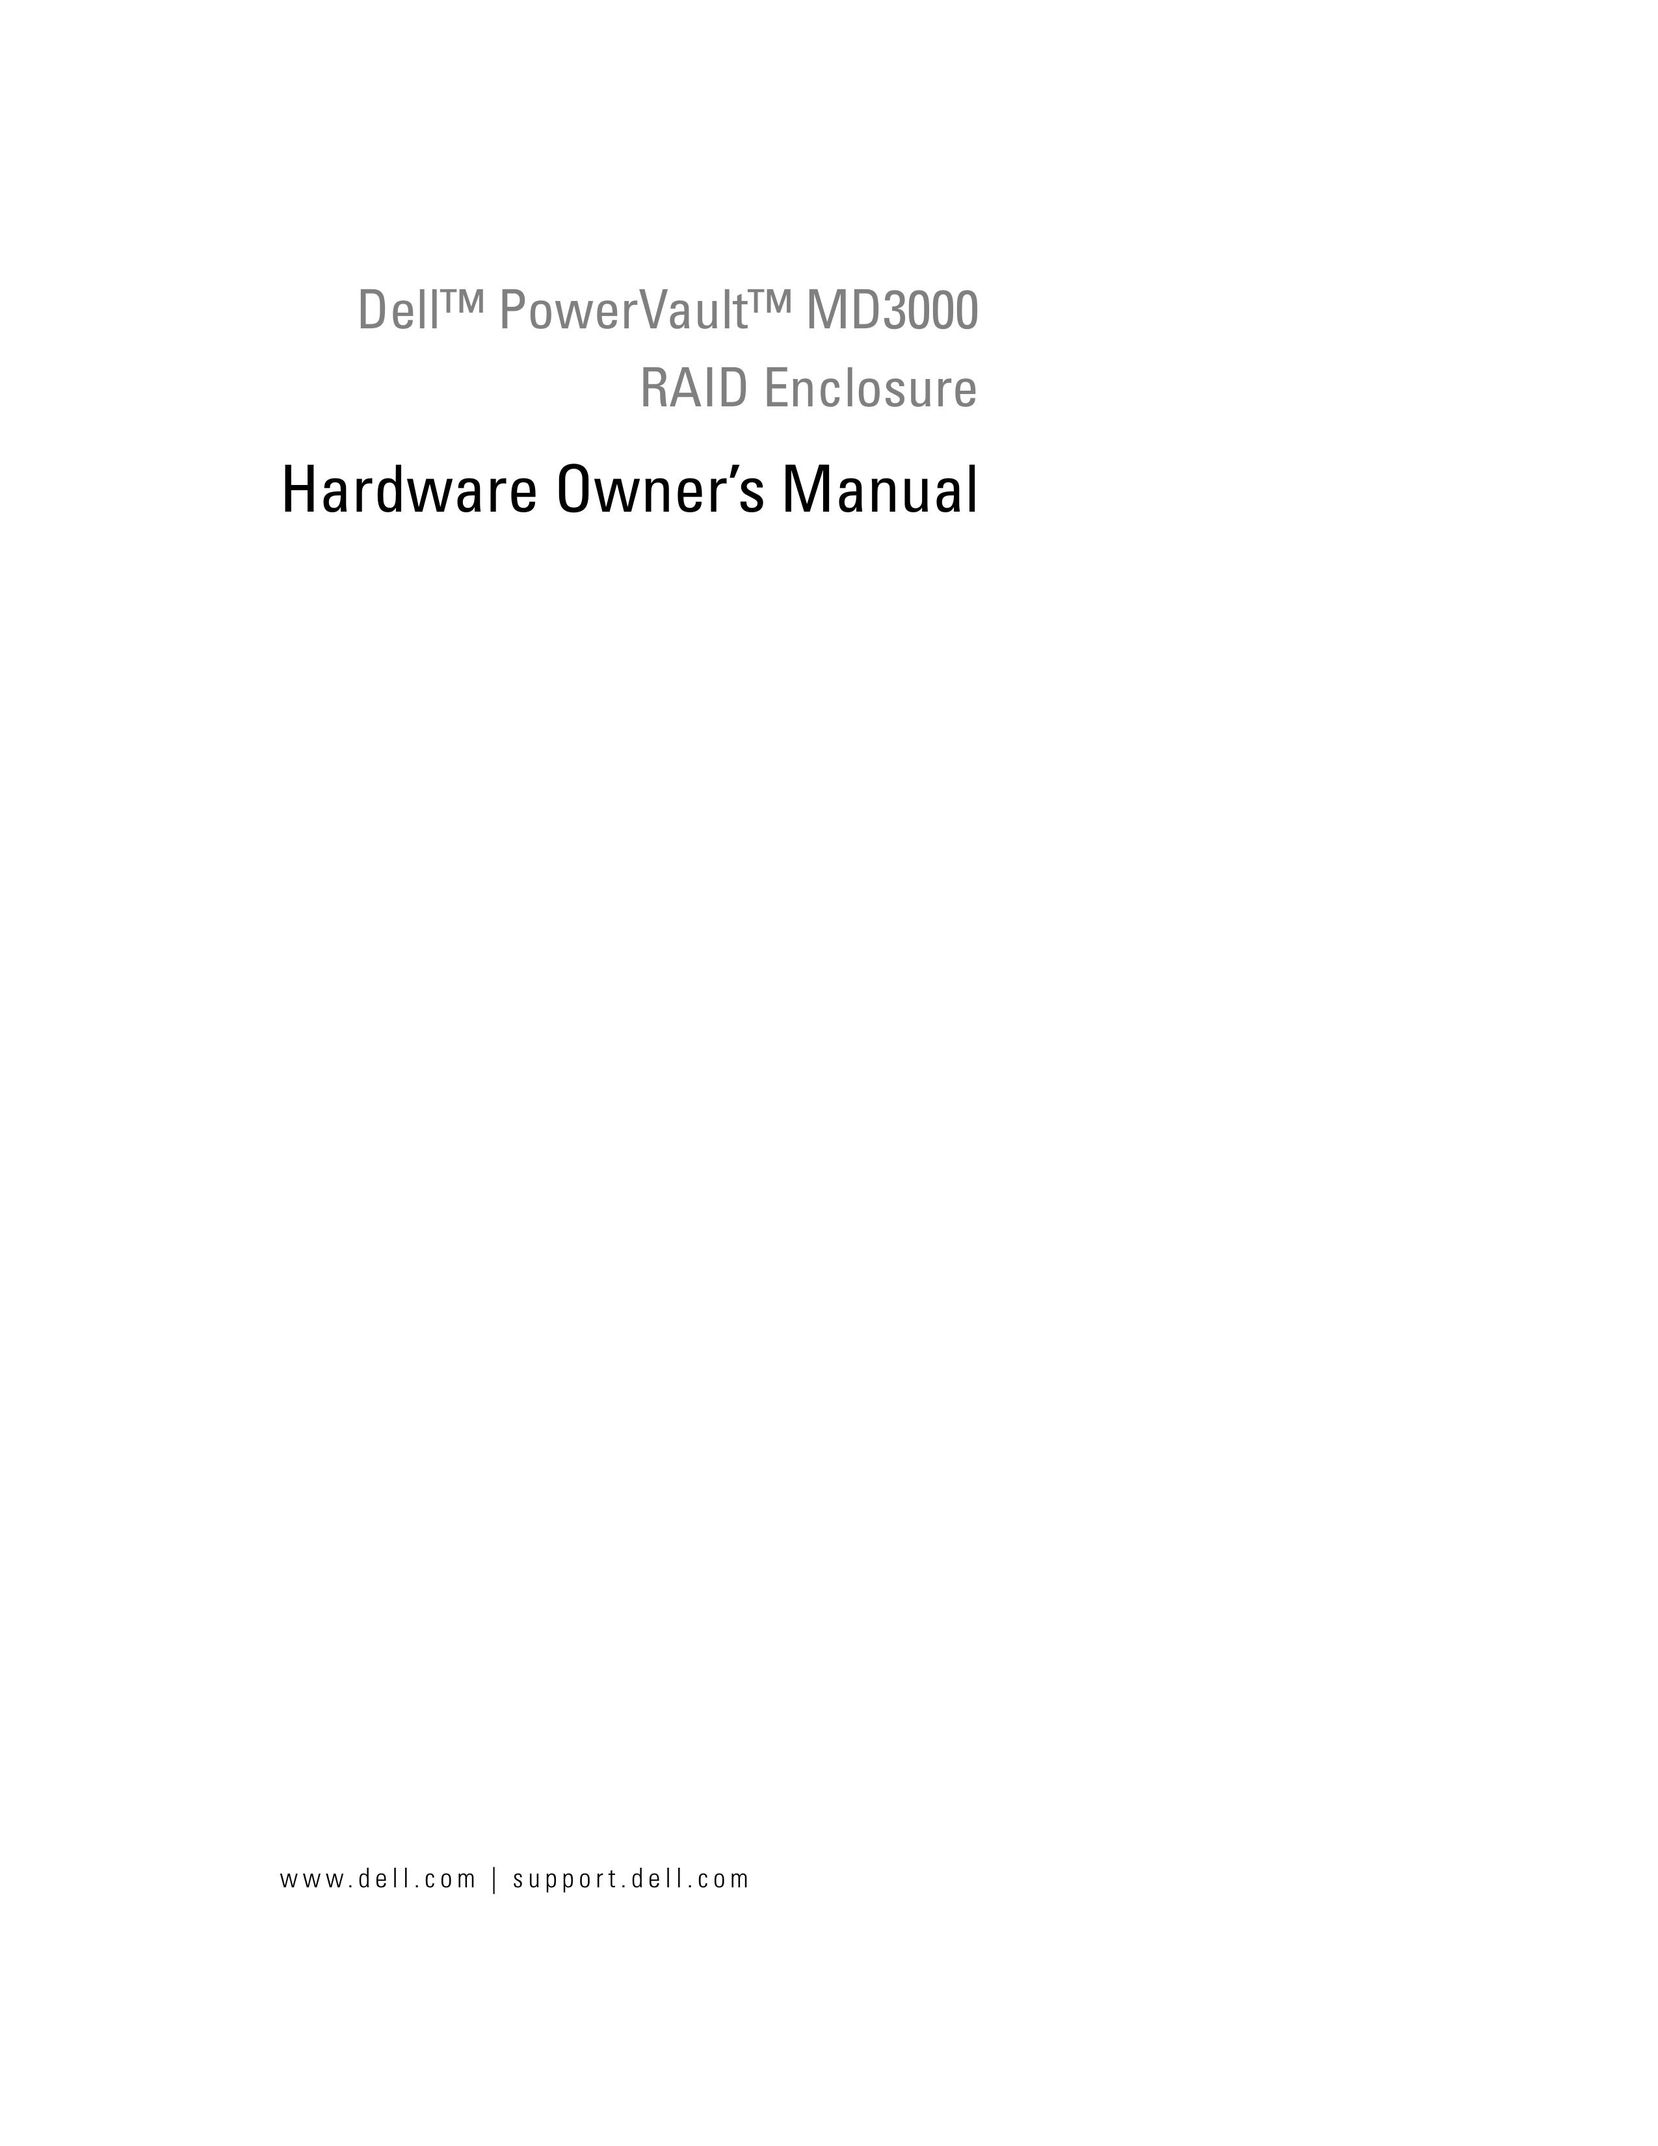 Dell MD3000 Computer Hardware User Manual